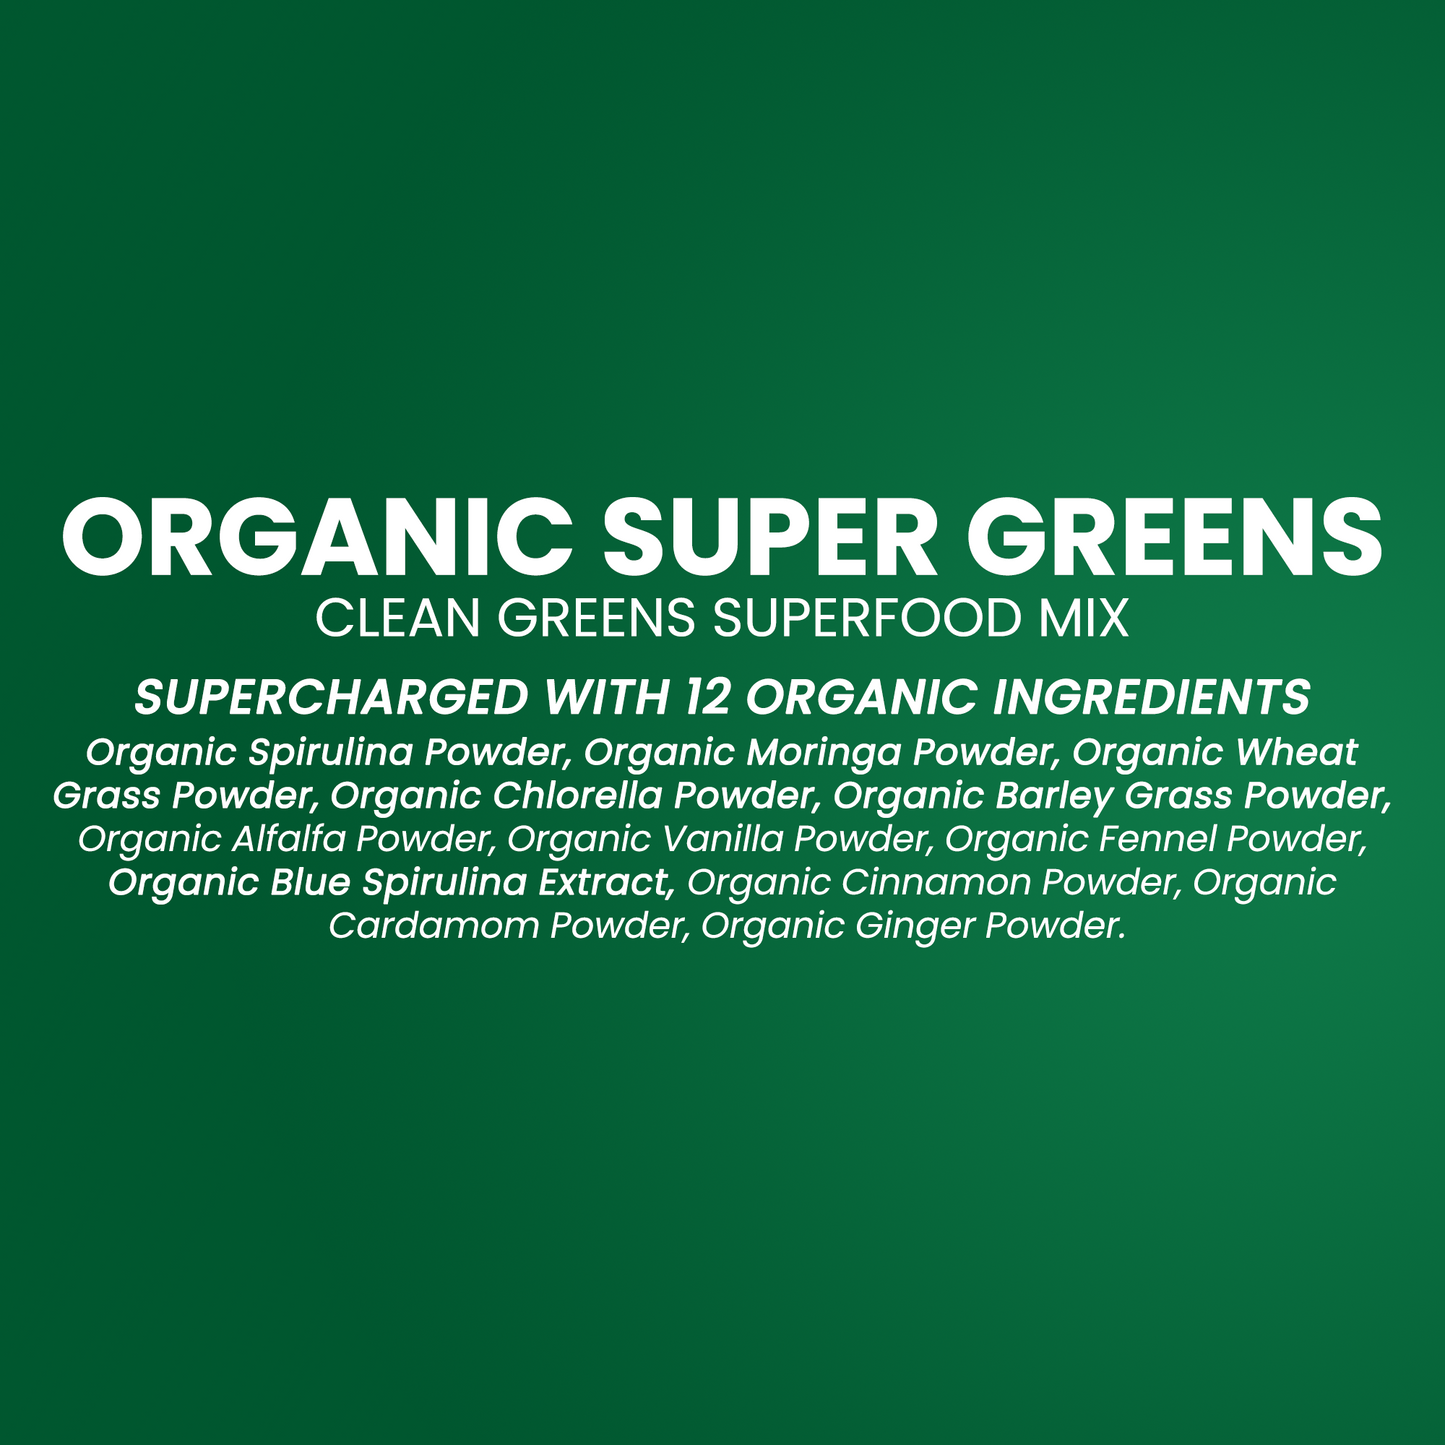 Organic Super Green for Immunity and Daily Detox